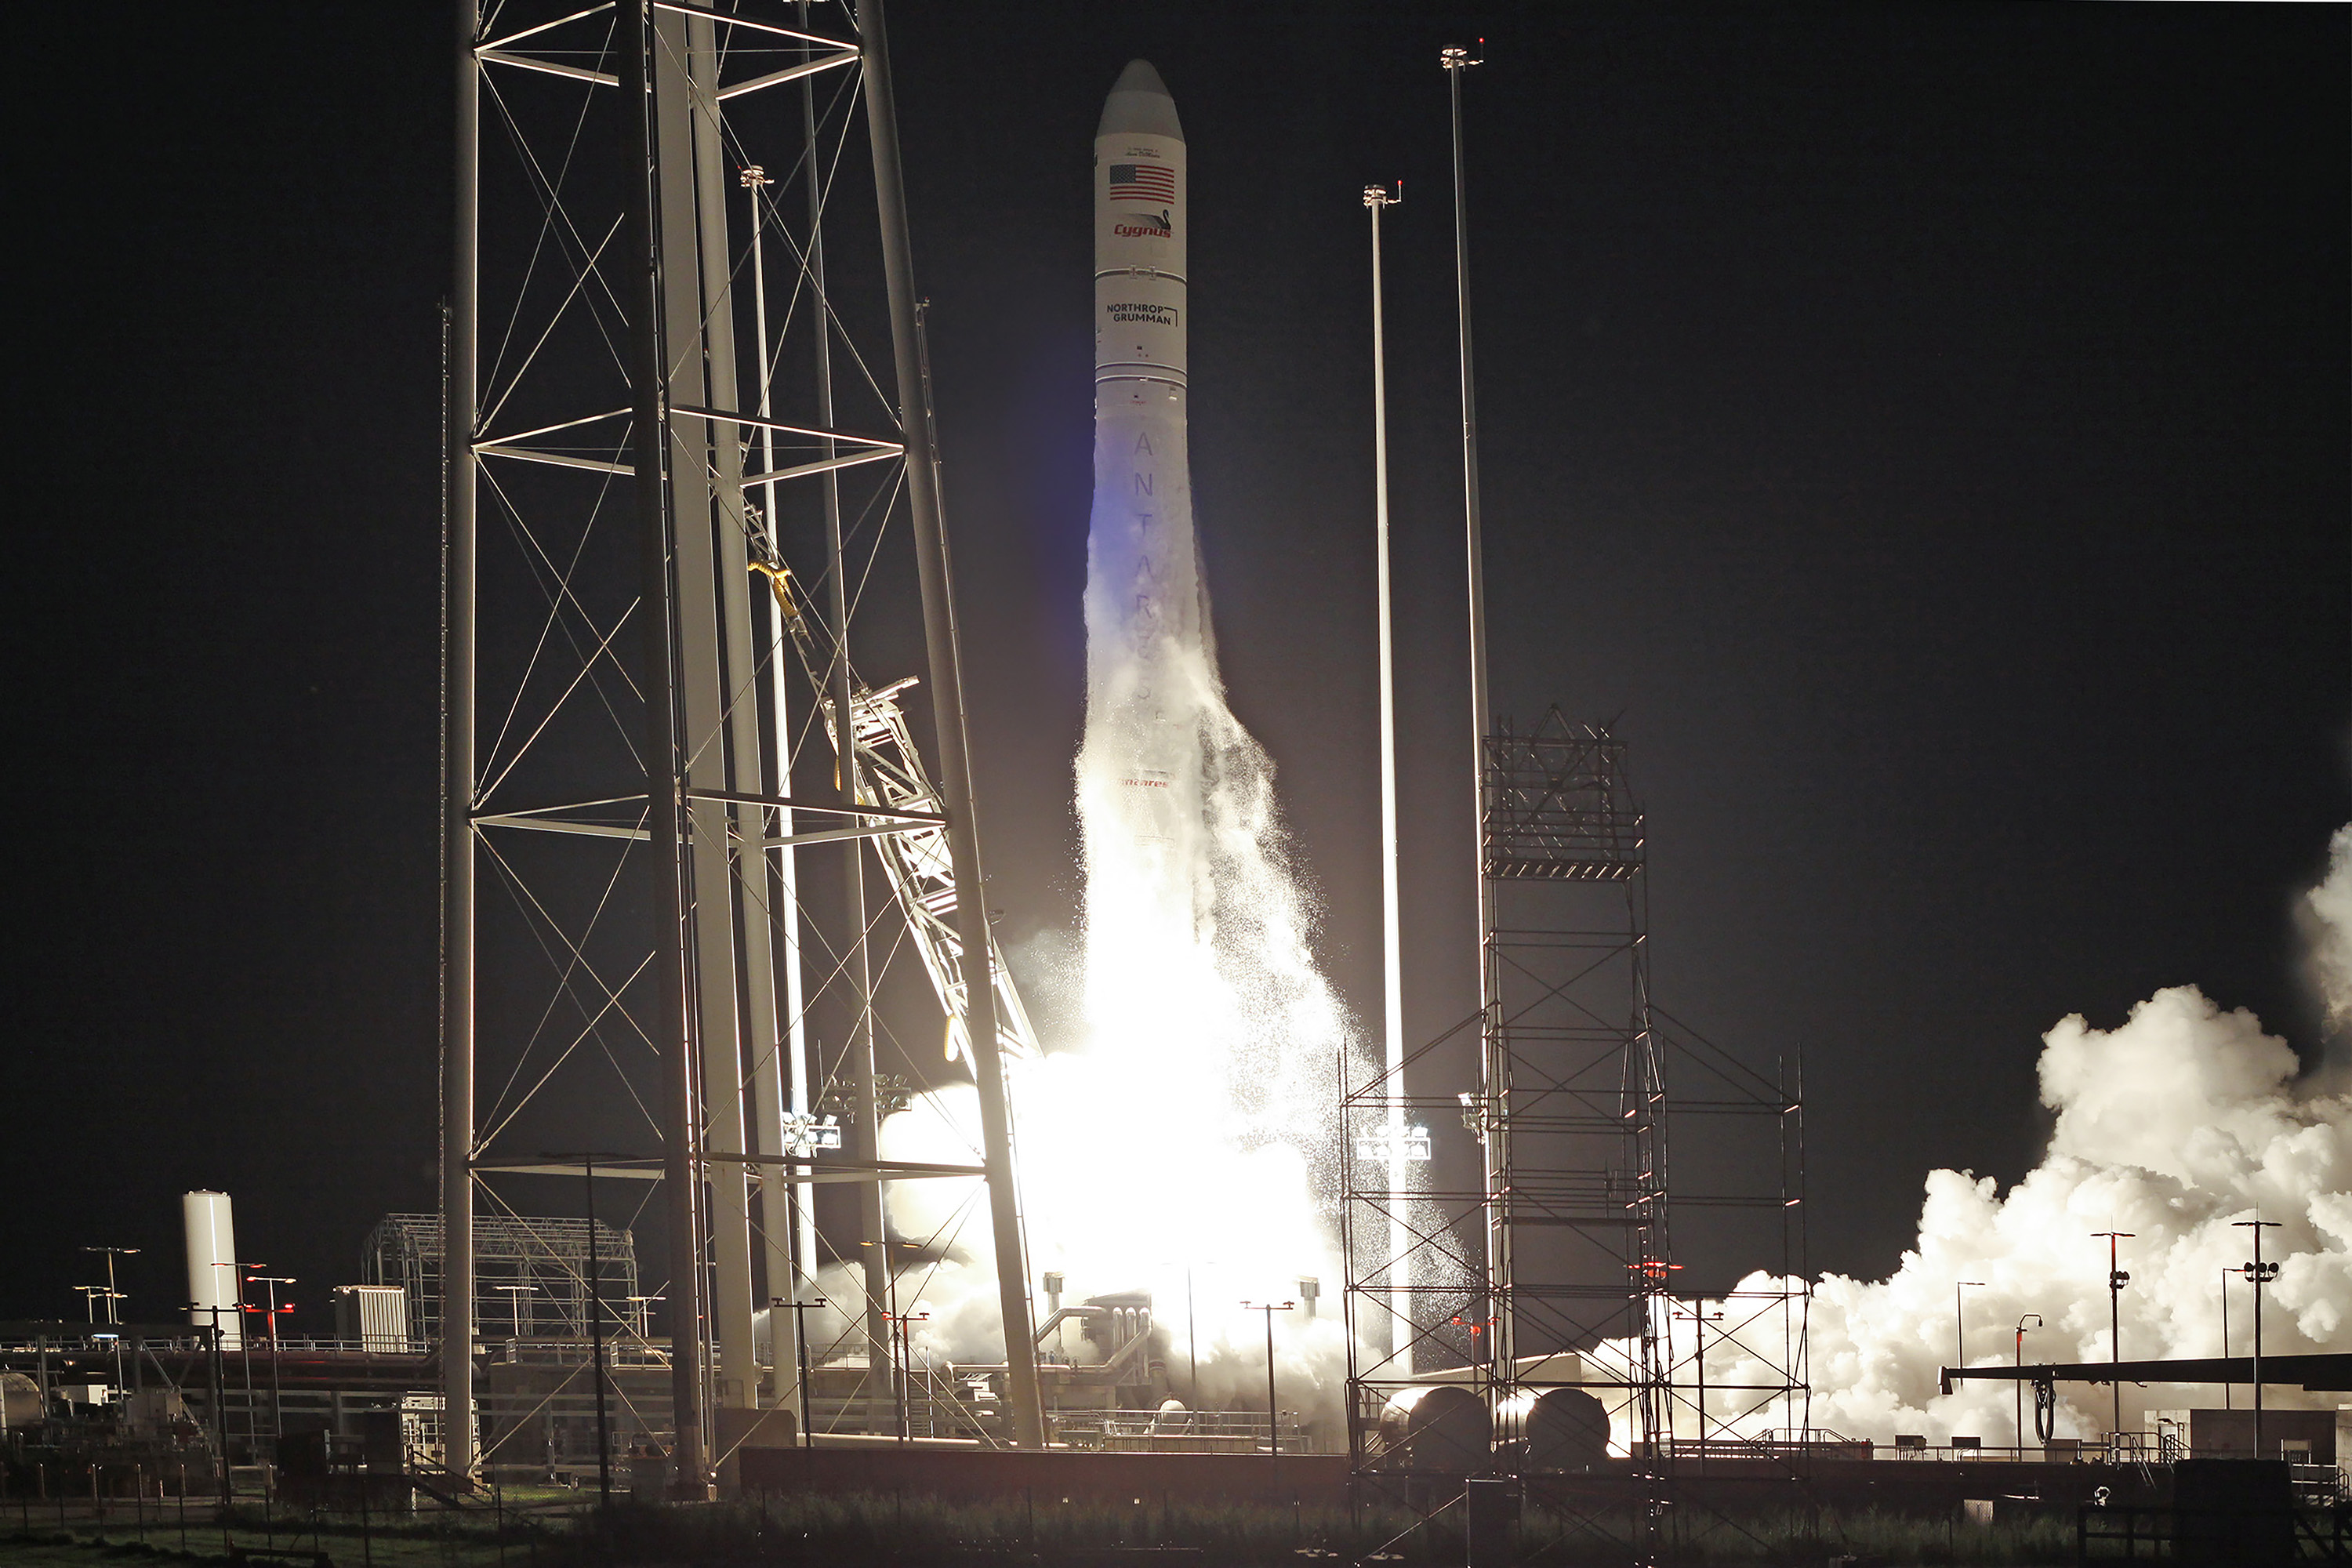 Northrop Grumman’s NG-19 Launch Marks 10 Years of International Space Station Cargo Resupply Missions